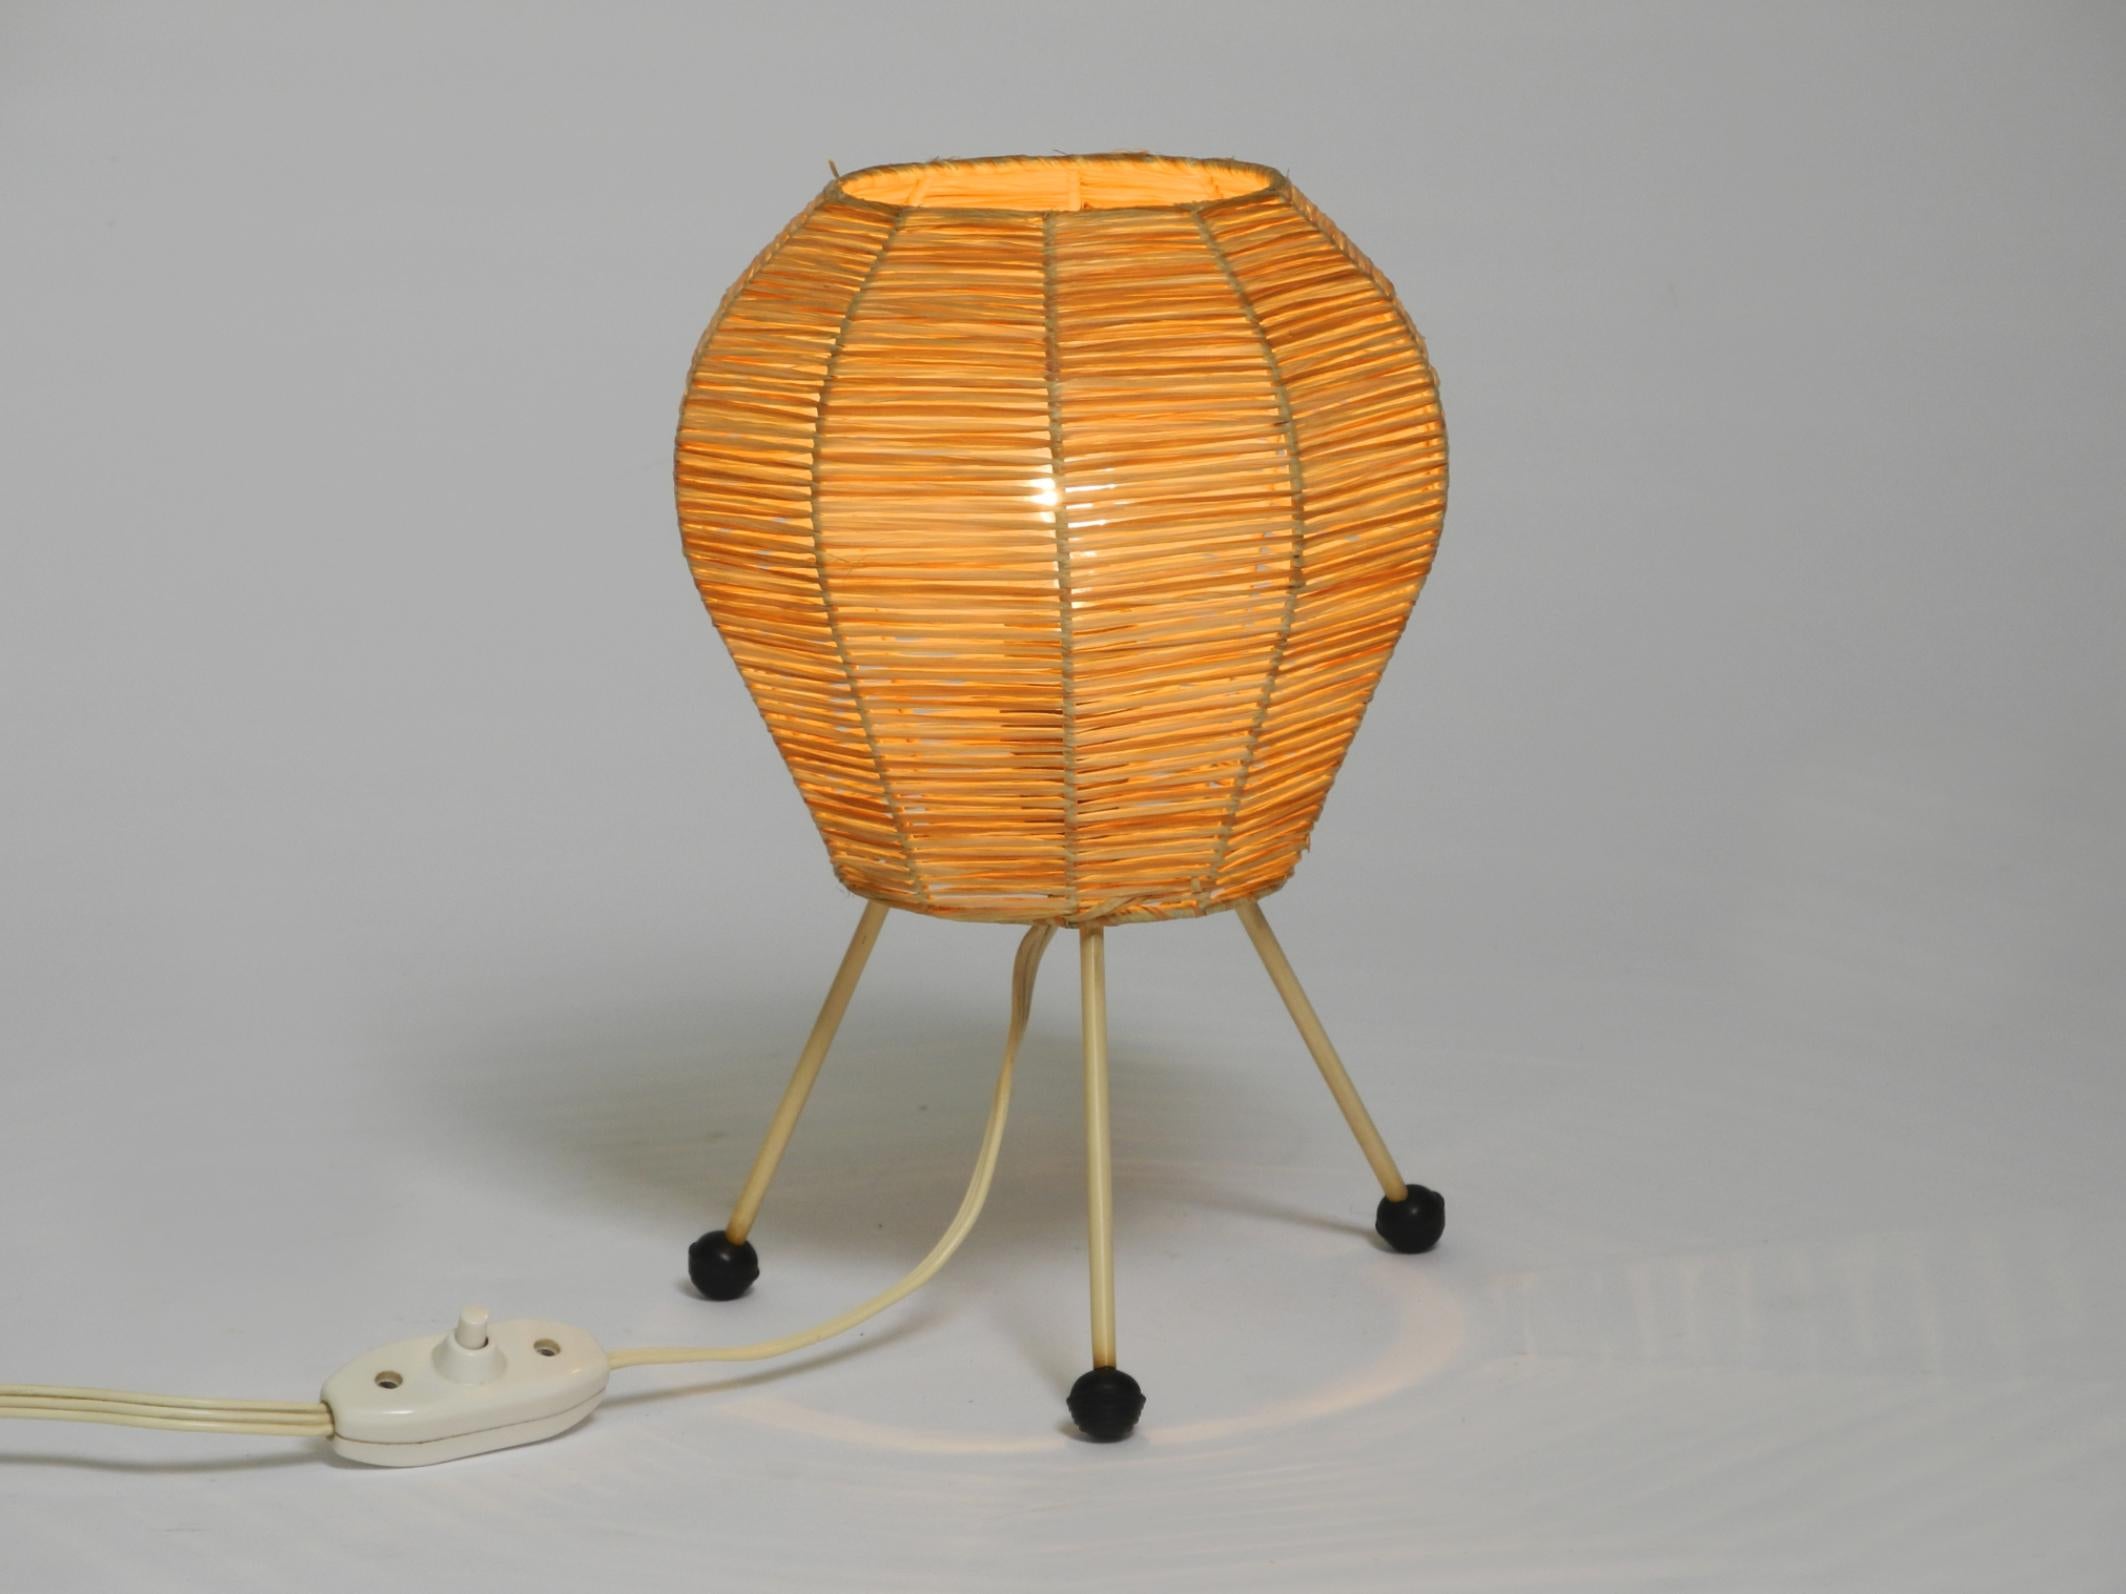 Beautiful Mid Century Modern tripod raffia table or night lamp. Typical 1950s design.
Very good vintage condition and no damage to the metal frame and lampshade.
Raffia weave is impeccable. Very clean and well-maintained condition. No tears or